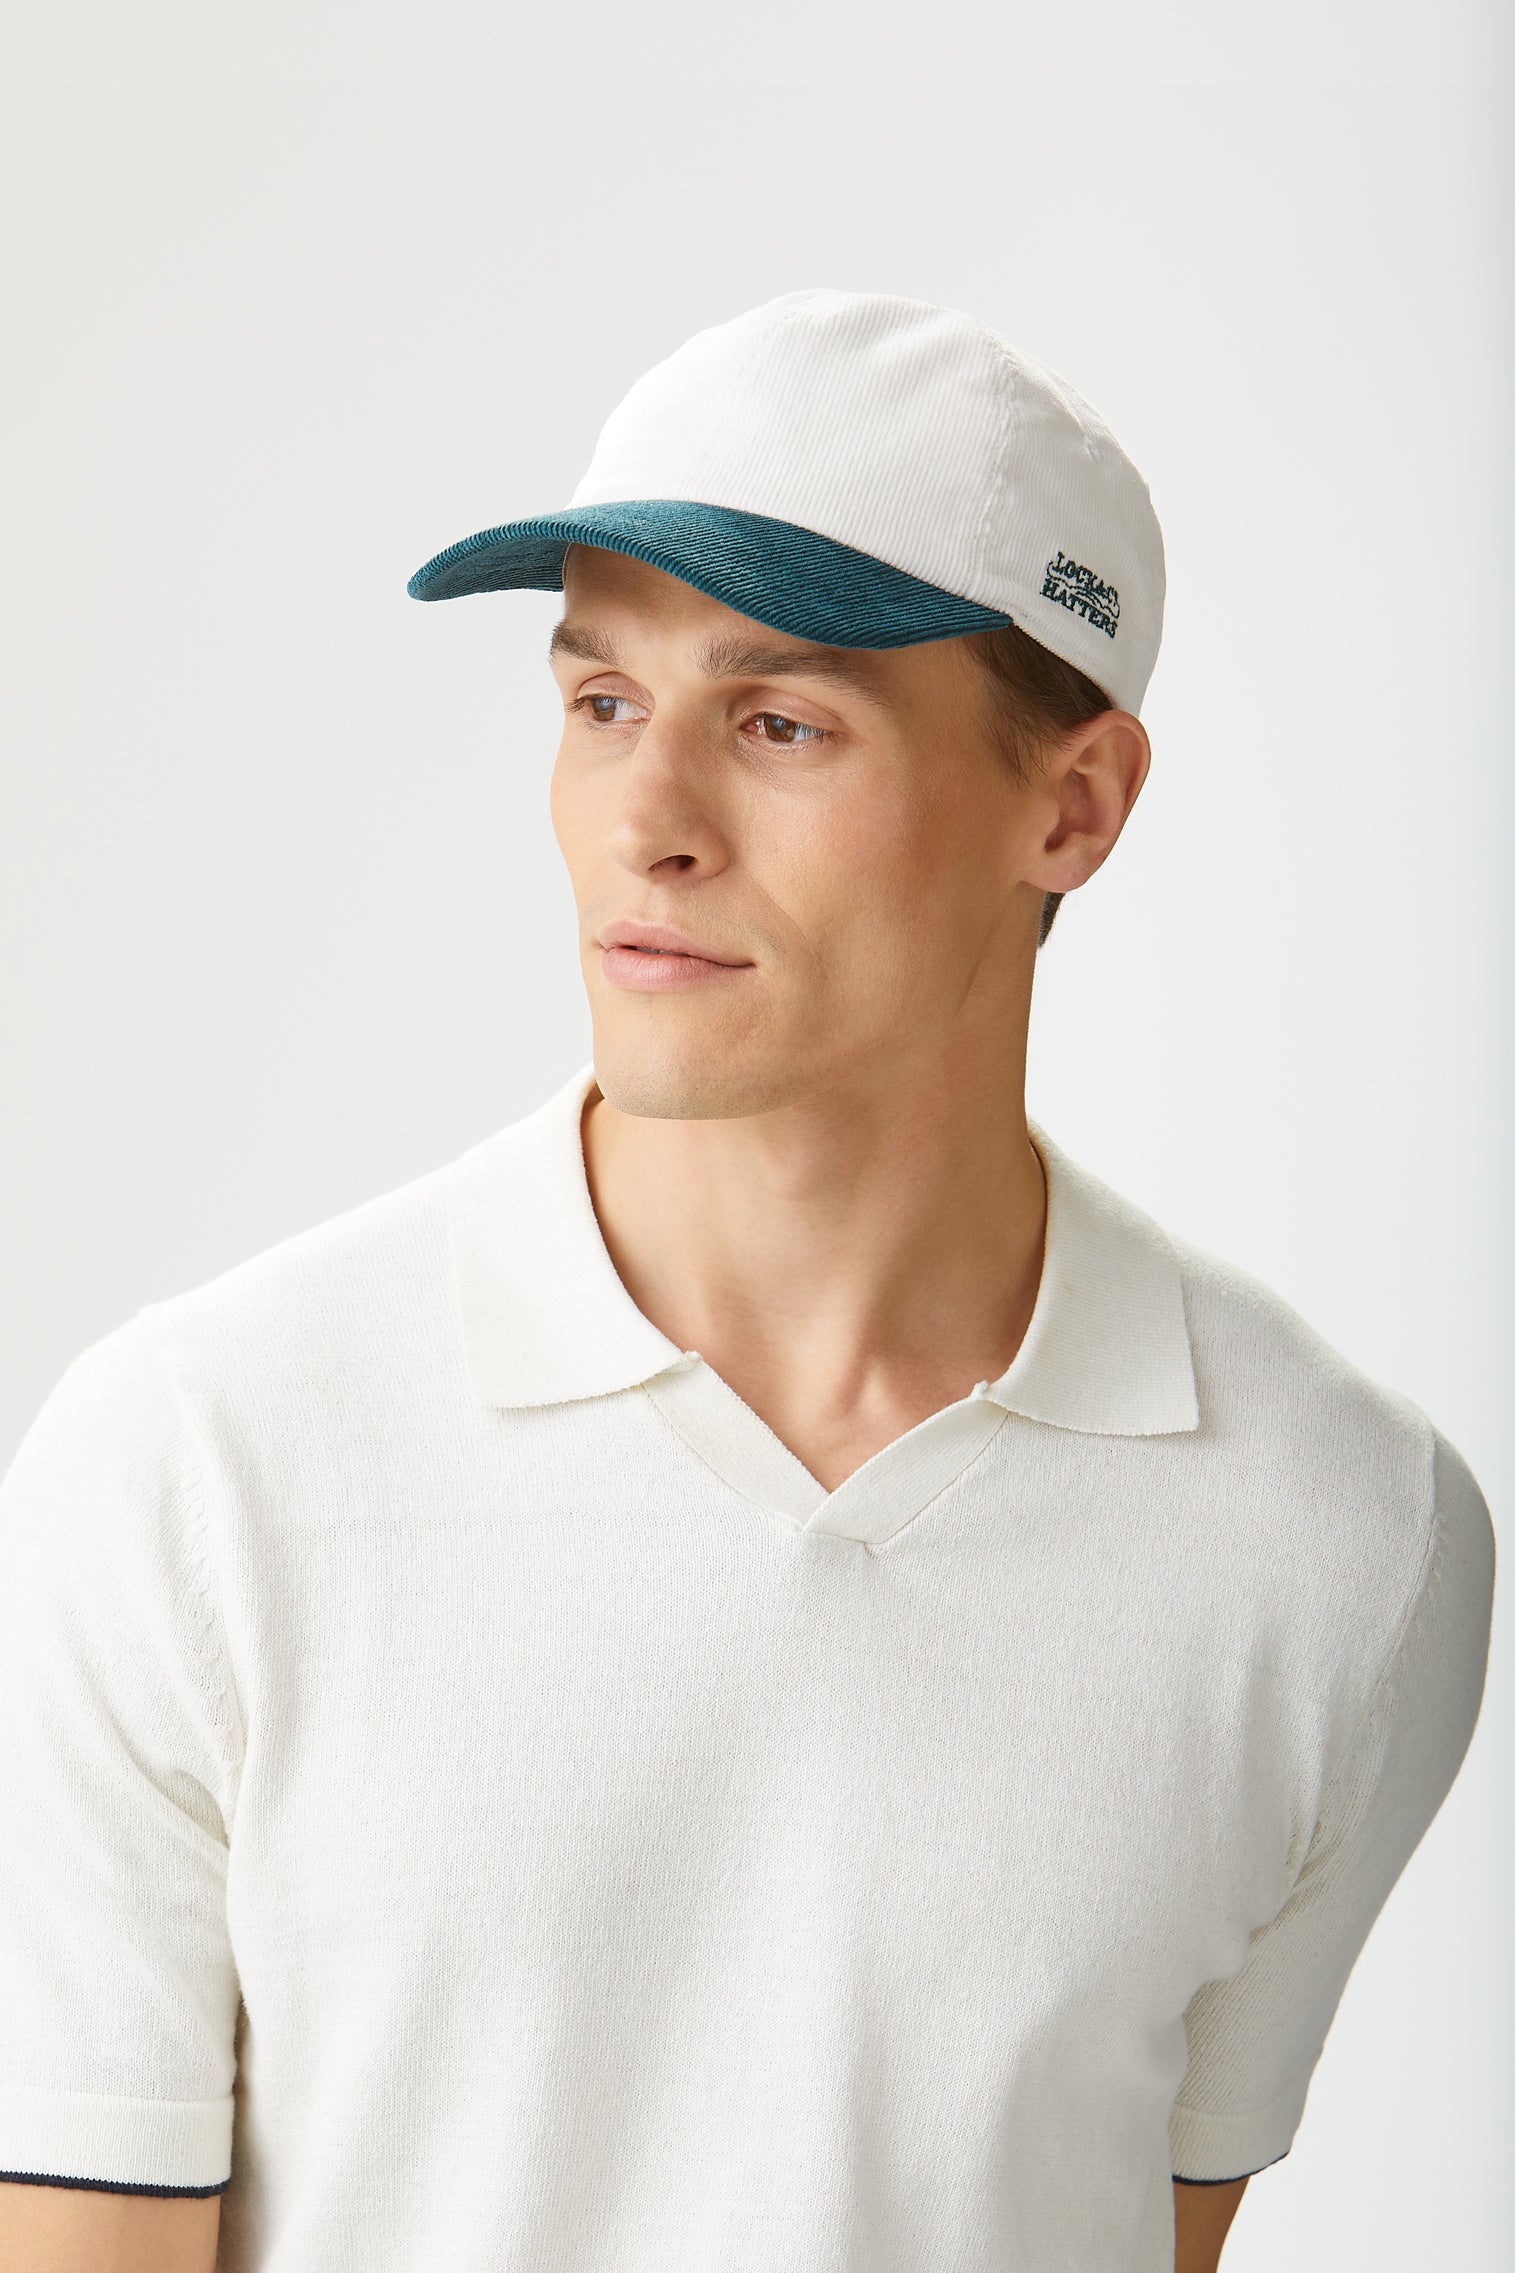 Adjustable Two-Tone Cord Baseball Cap - Hats for Tall People - Lock & Co. Hatters London UK